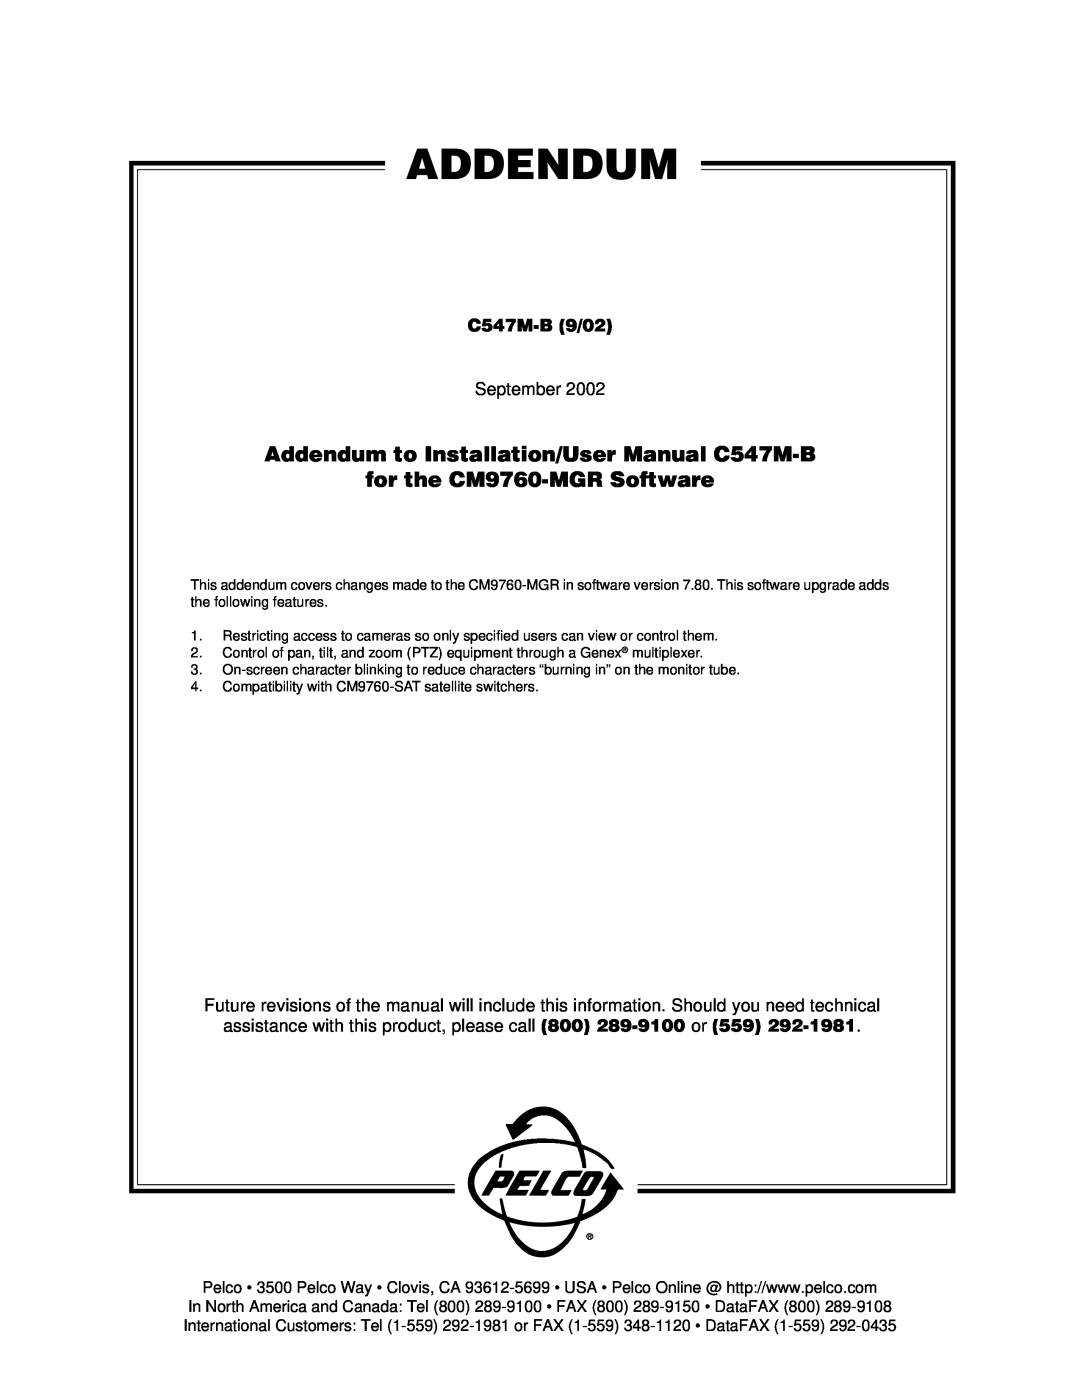 Pelco user manual for the CM9760-MGRSoftware, C547M-B9/02, Addendum 